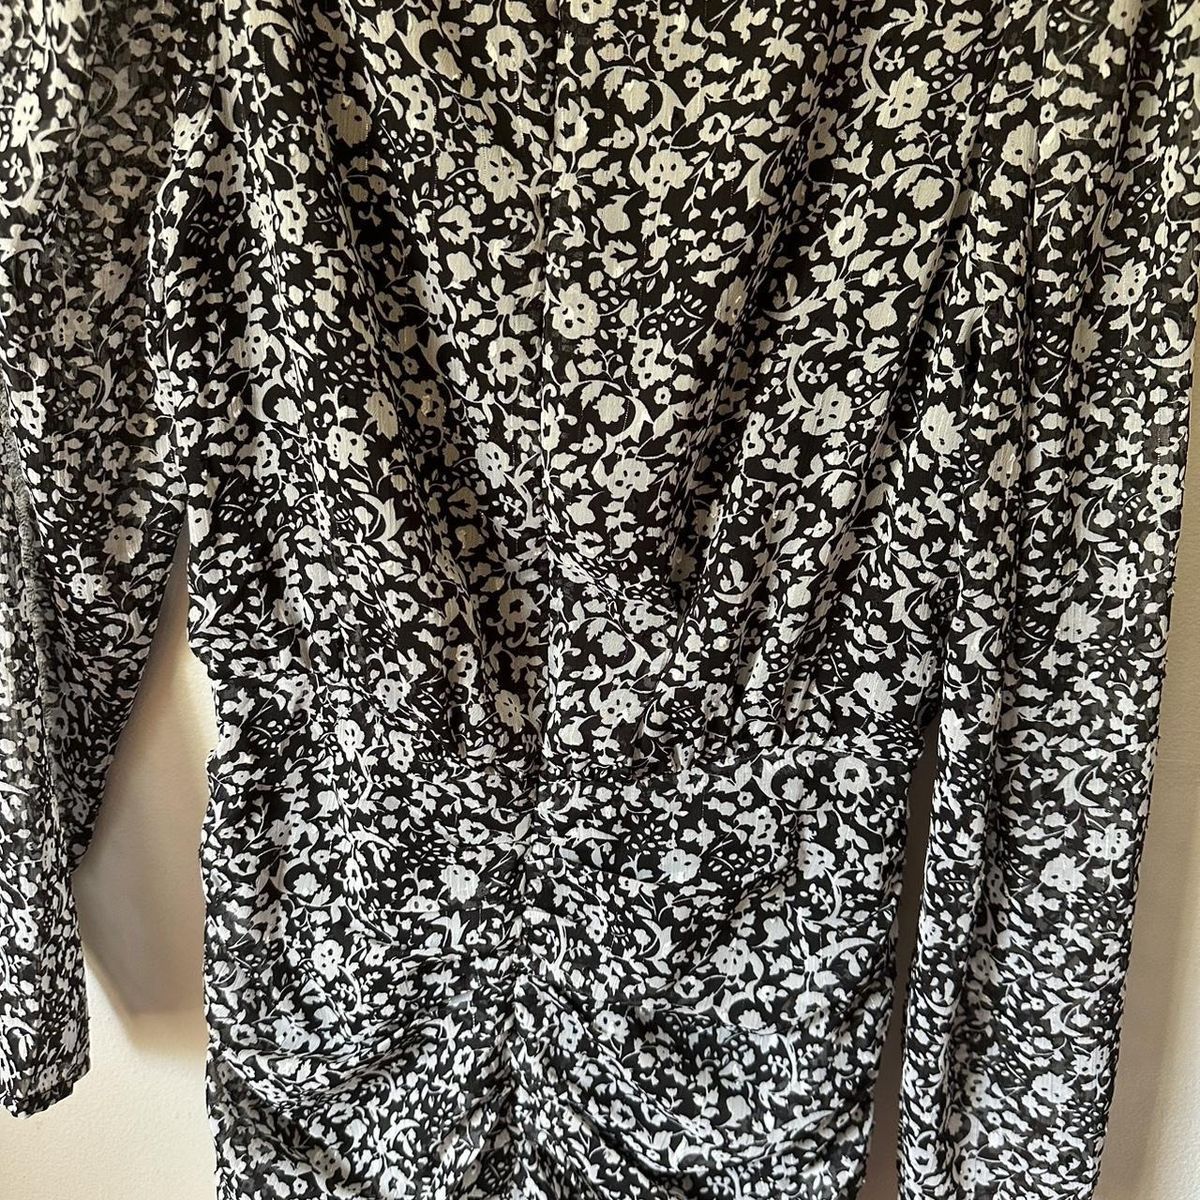 Blush Prom Size S Wedding Guest Long Sleeve Floral Black Cocktail Dress on Queenly